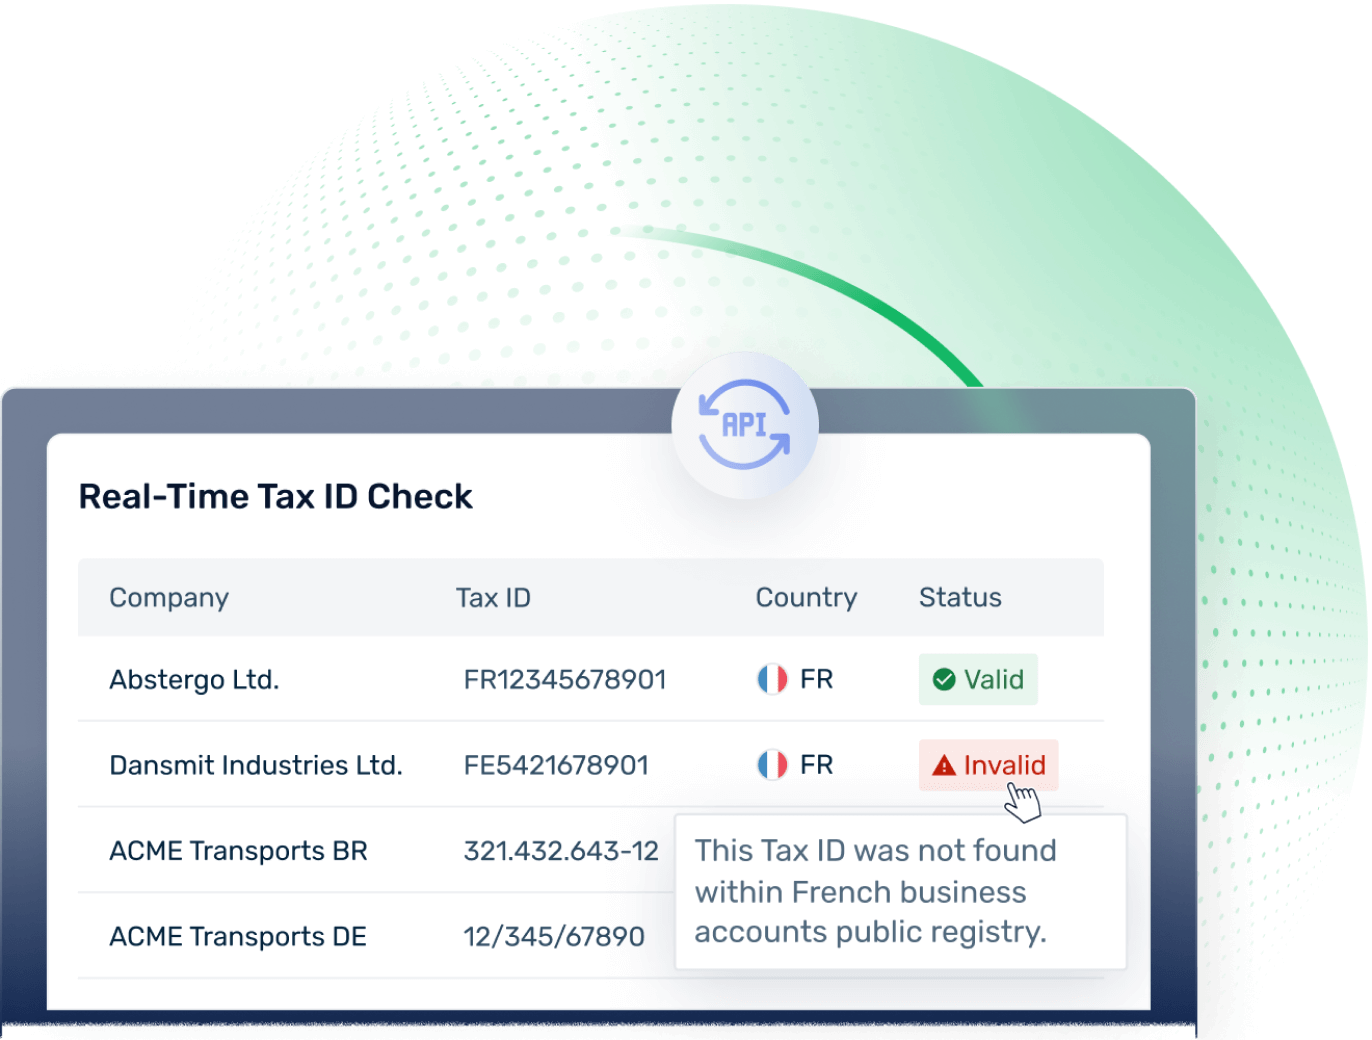 Real-Time Tax ID Check screen